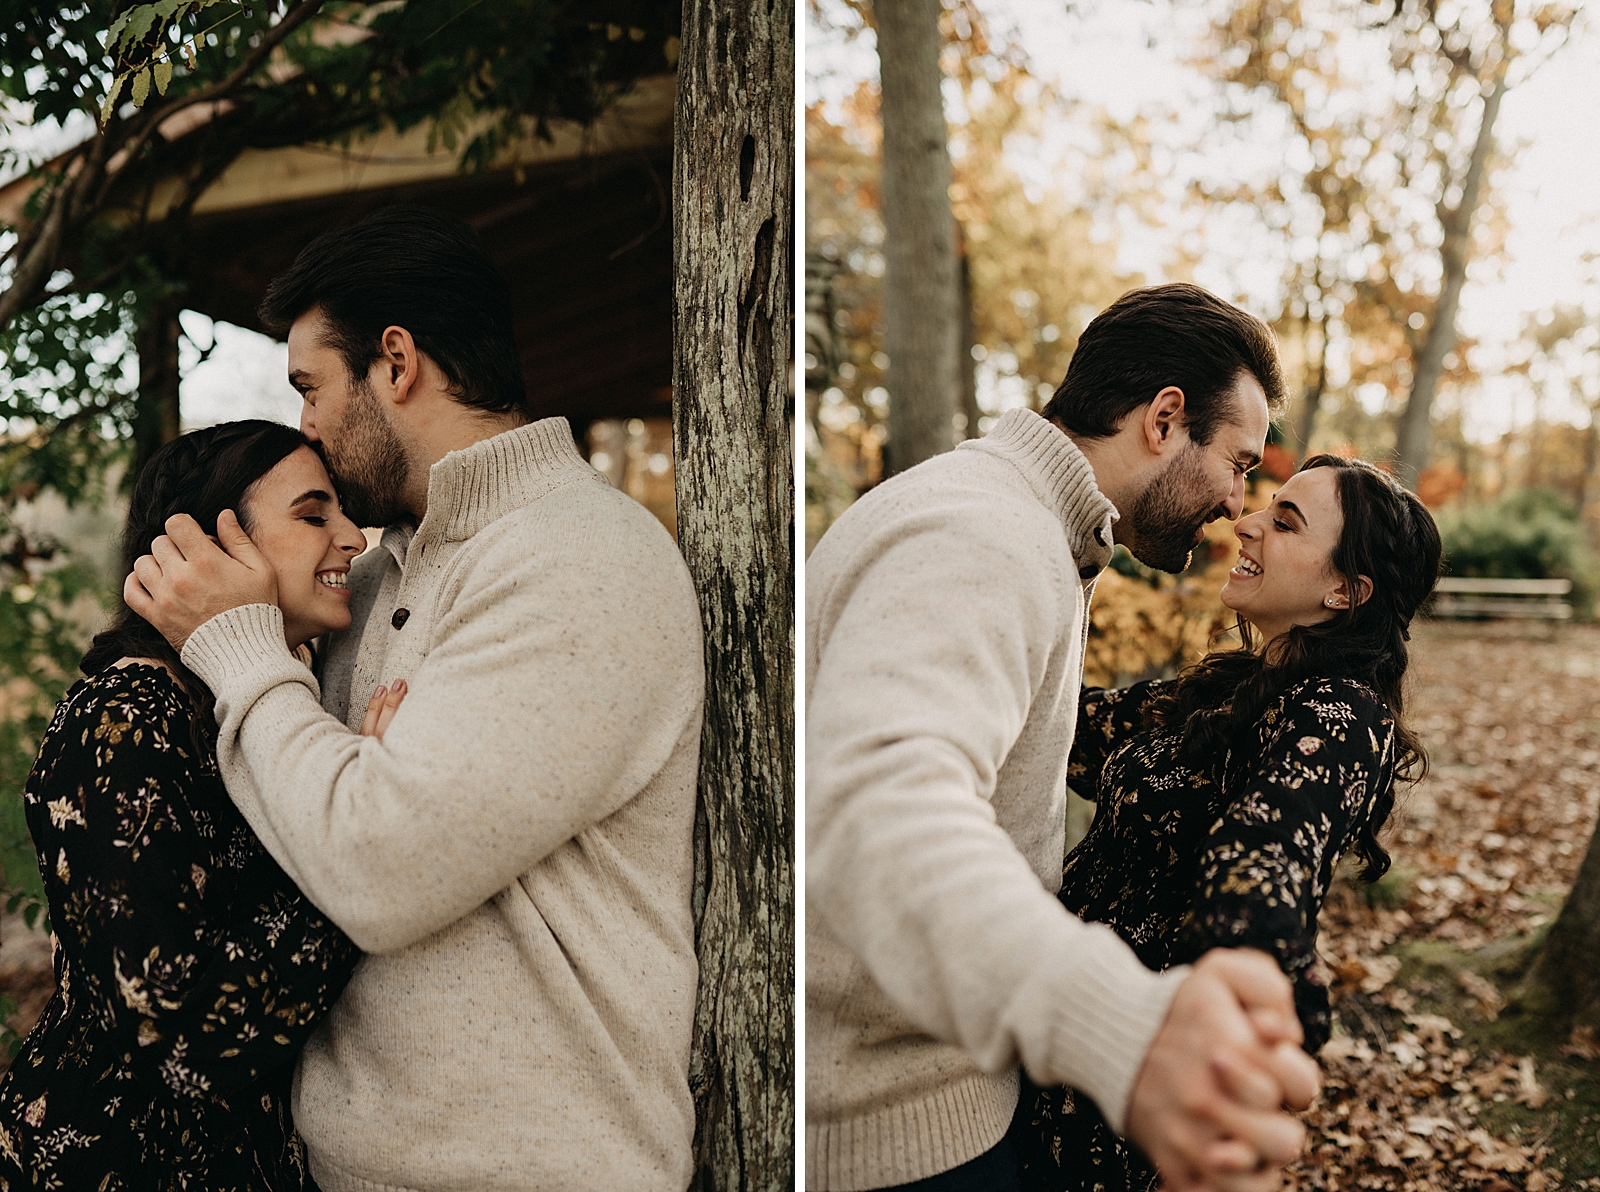 Man kissing woman on forehead outside in fall area